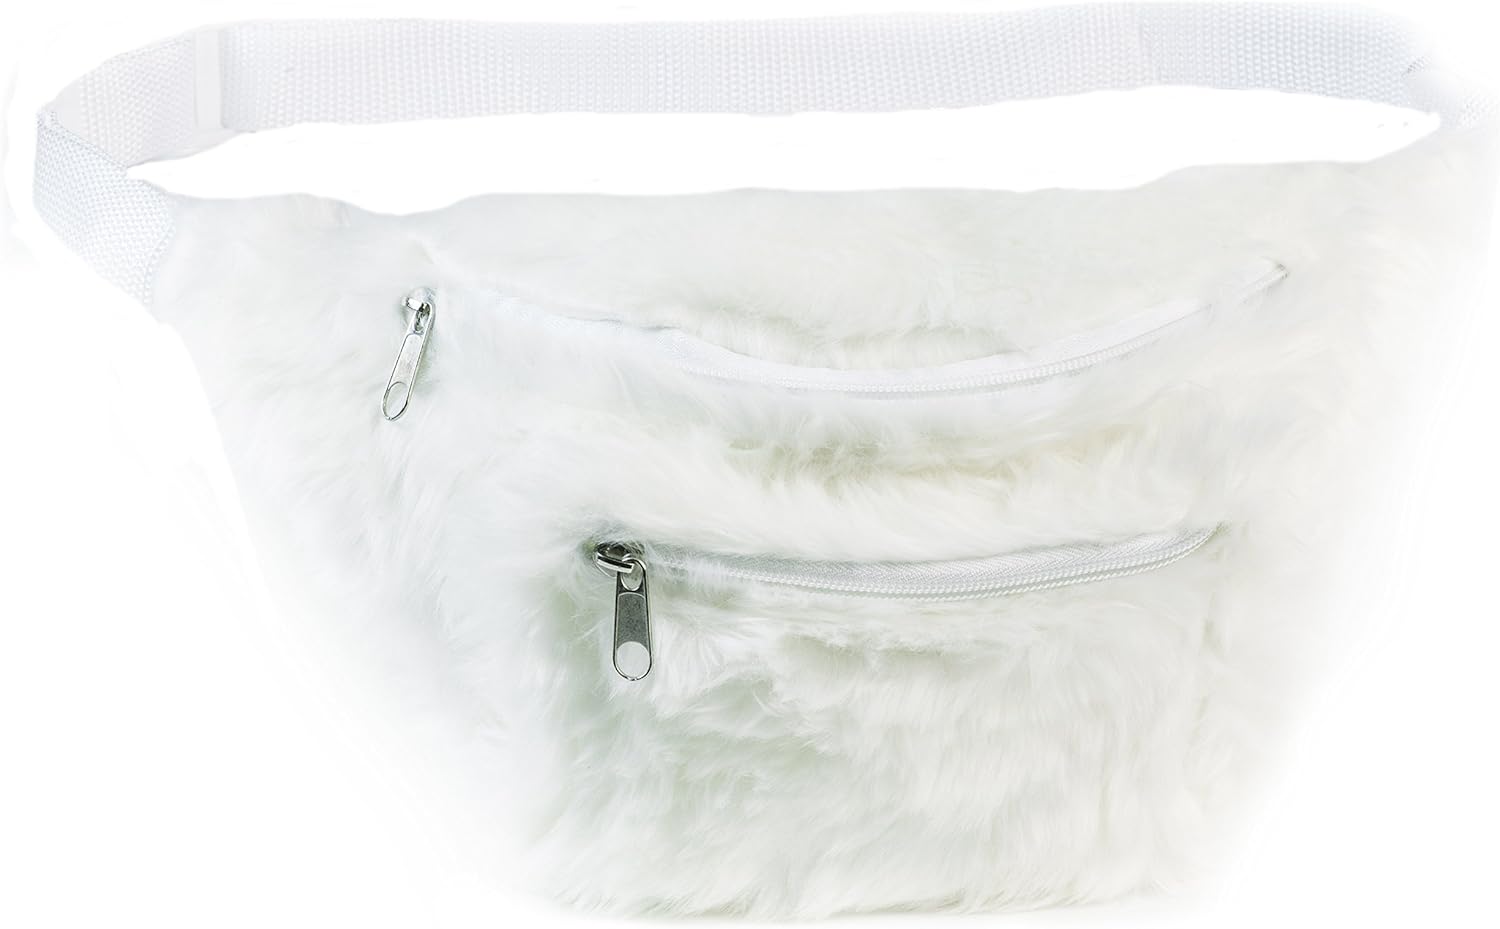 Furry Fanny Pack - Fuzzy Fanny Pack